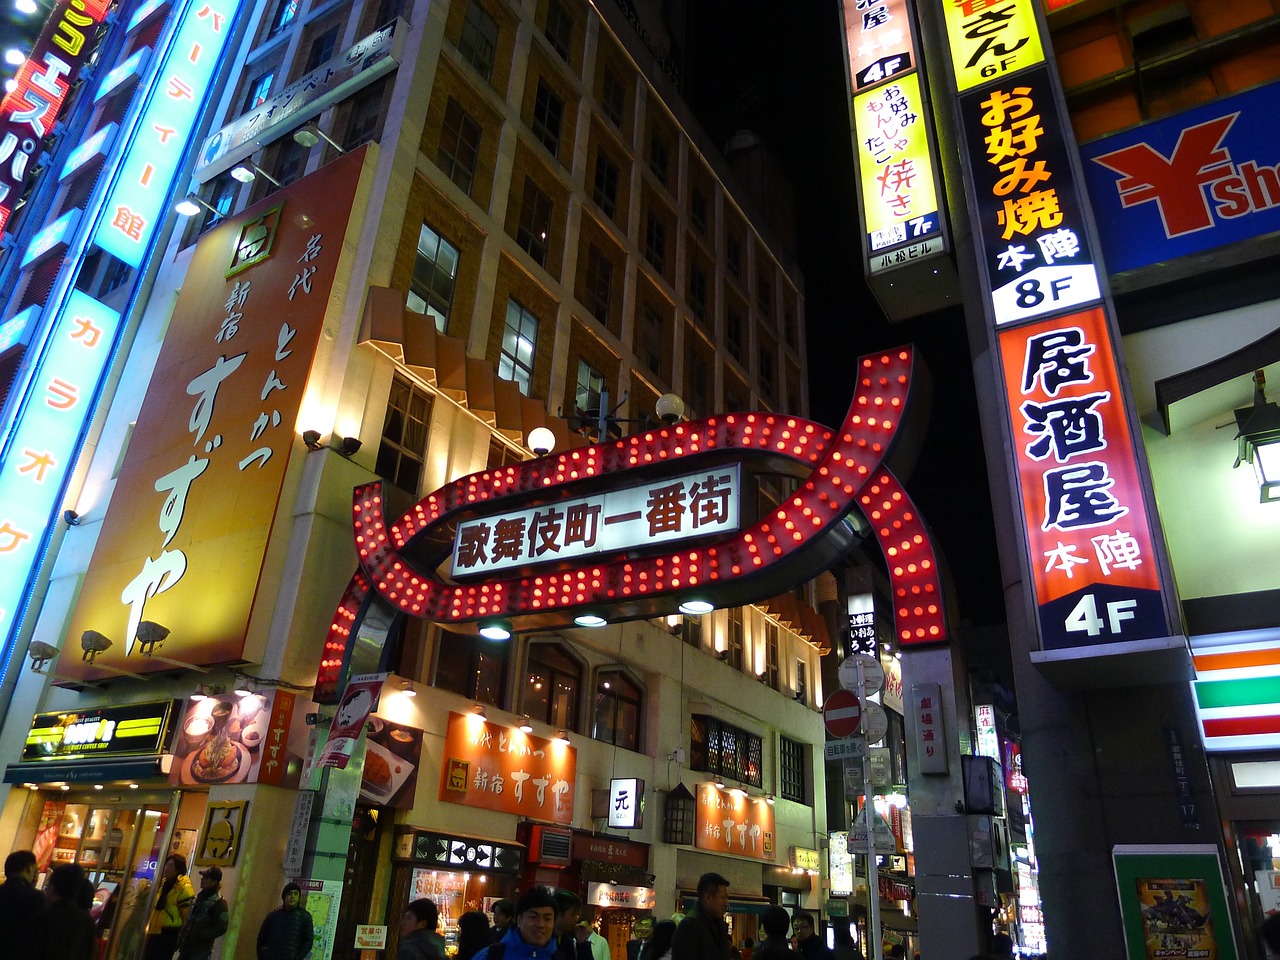 Kabukicho in the center of Tokyo. One of todays Red-light Districts in Japan.